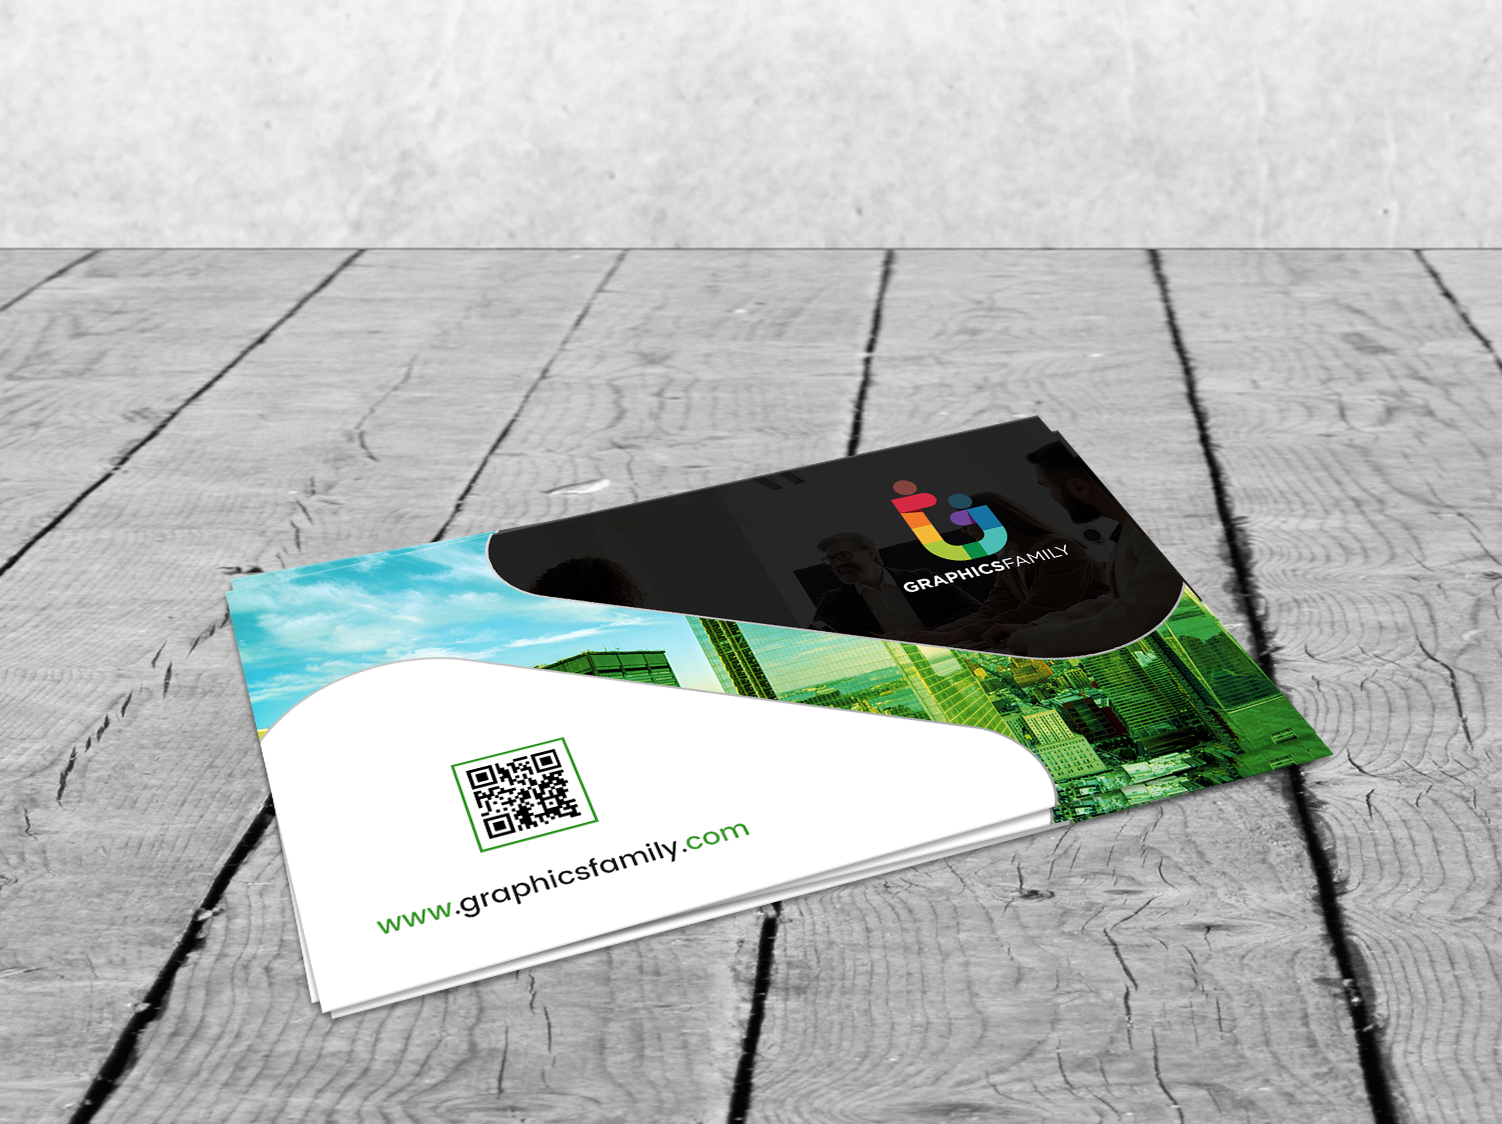 Free Printable Business Card Template